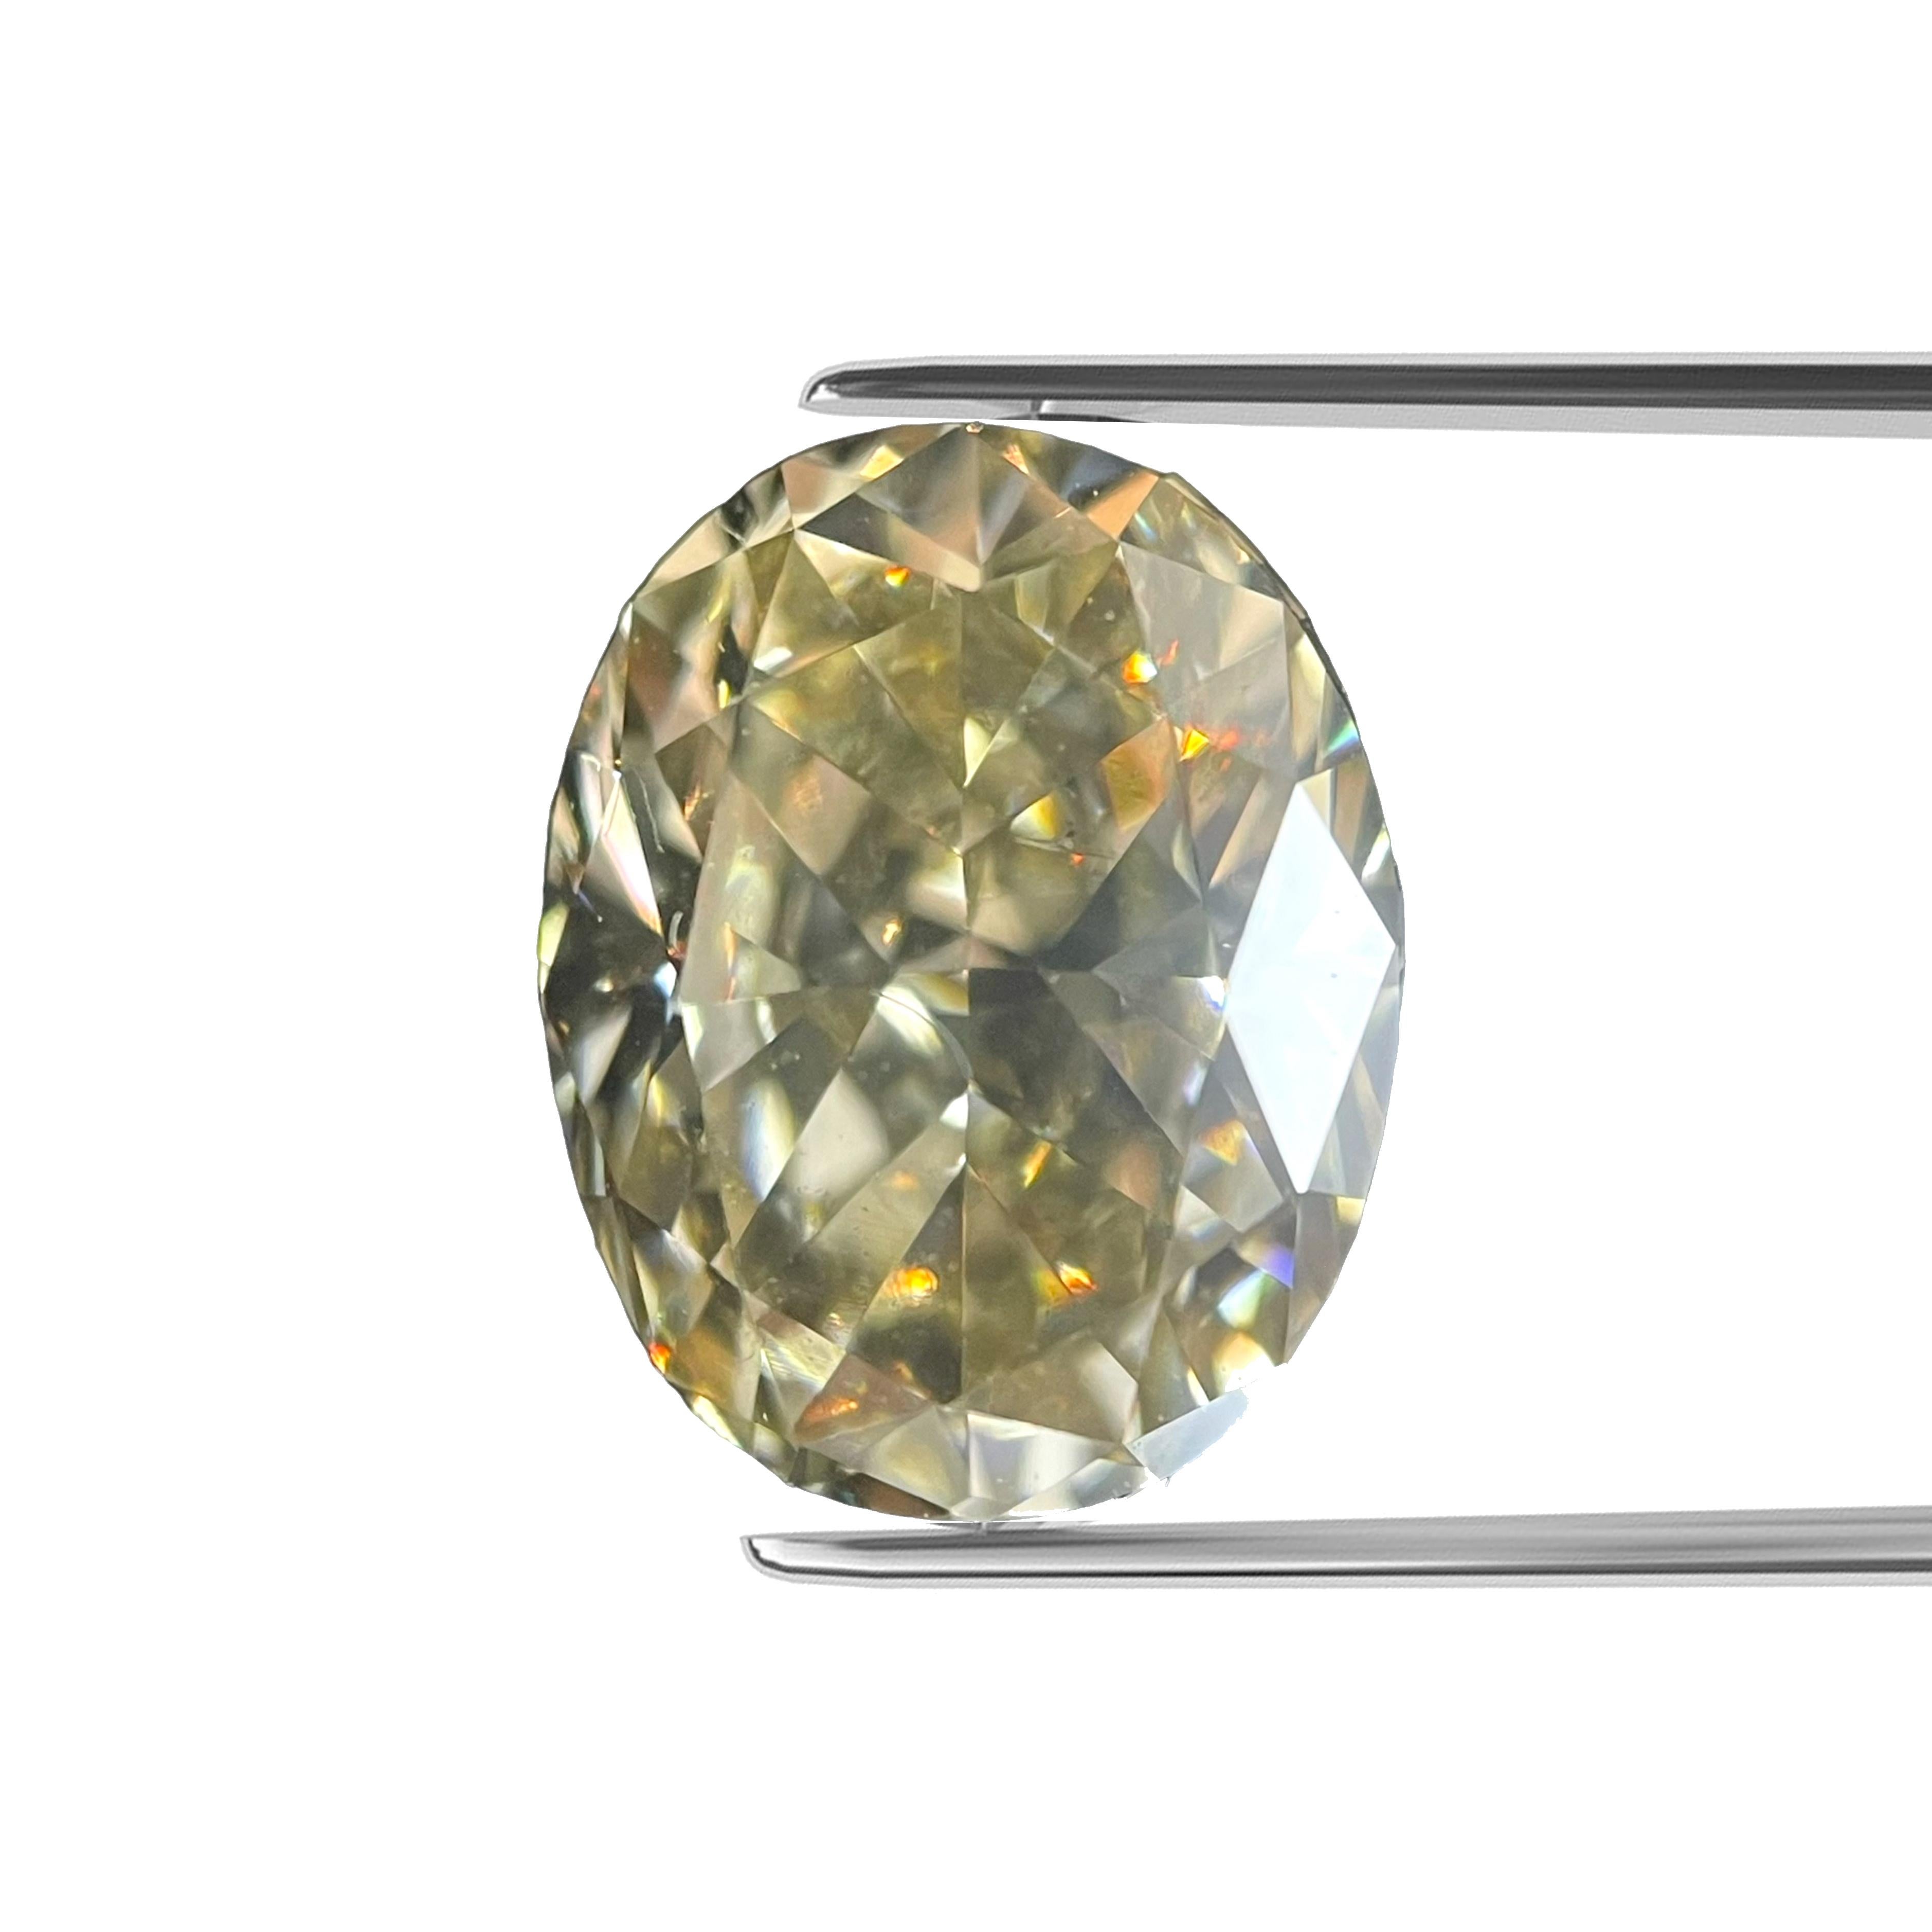 ITEM DESCRIPTION

ID #:	NYC55798
Stone Shape: OVAL BRILLIANT 
Diamond Weight: 1.52ct
Clarity: SI1
Color: Fancy Brownish Yellow
Cut:	Excellent
Measurements: 7.99 x 6.38 x 4.00 mm
Depth %:	62.8%
Table %:	62%
Symmetry: Good
Polish: Good
Fluorescence: